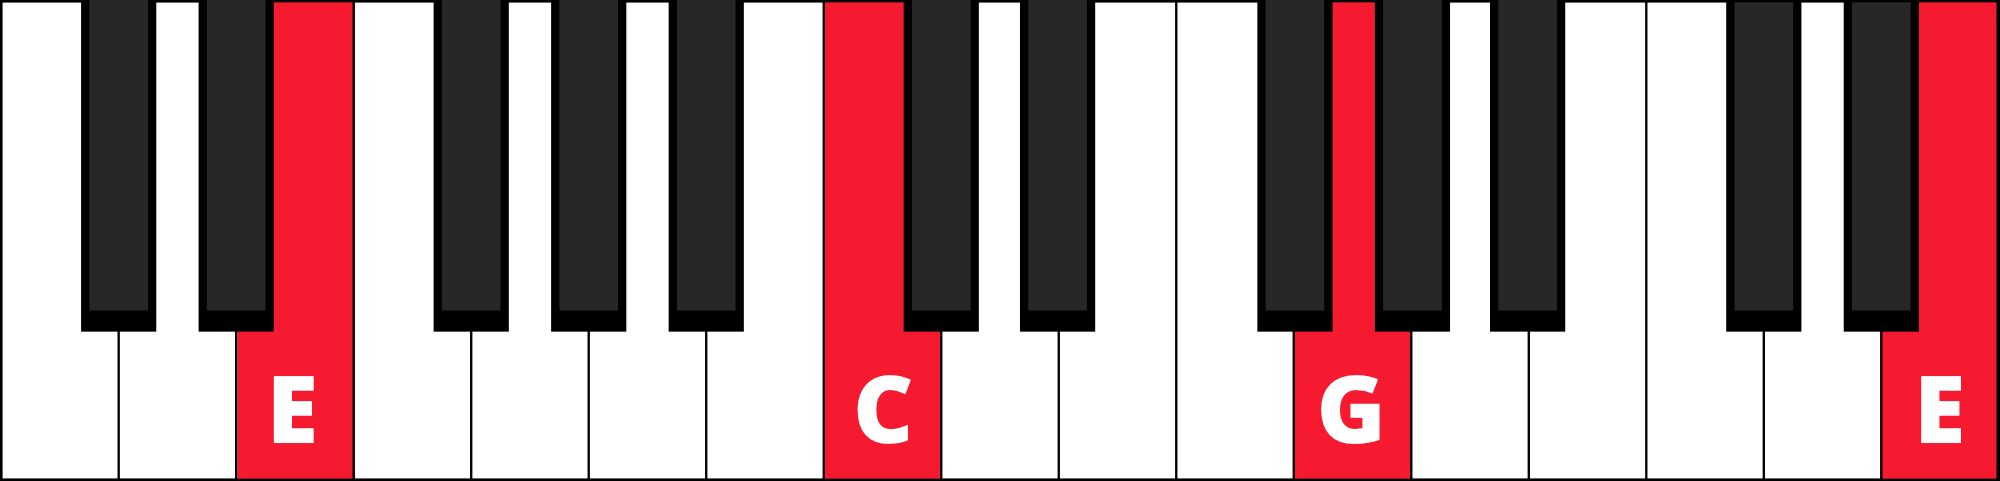 G Chord Piano Open Chord Voicings On The Piano